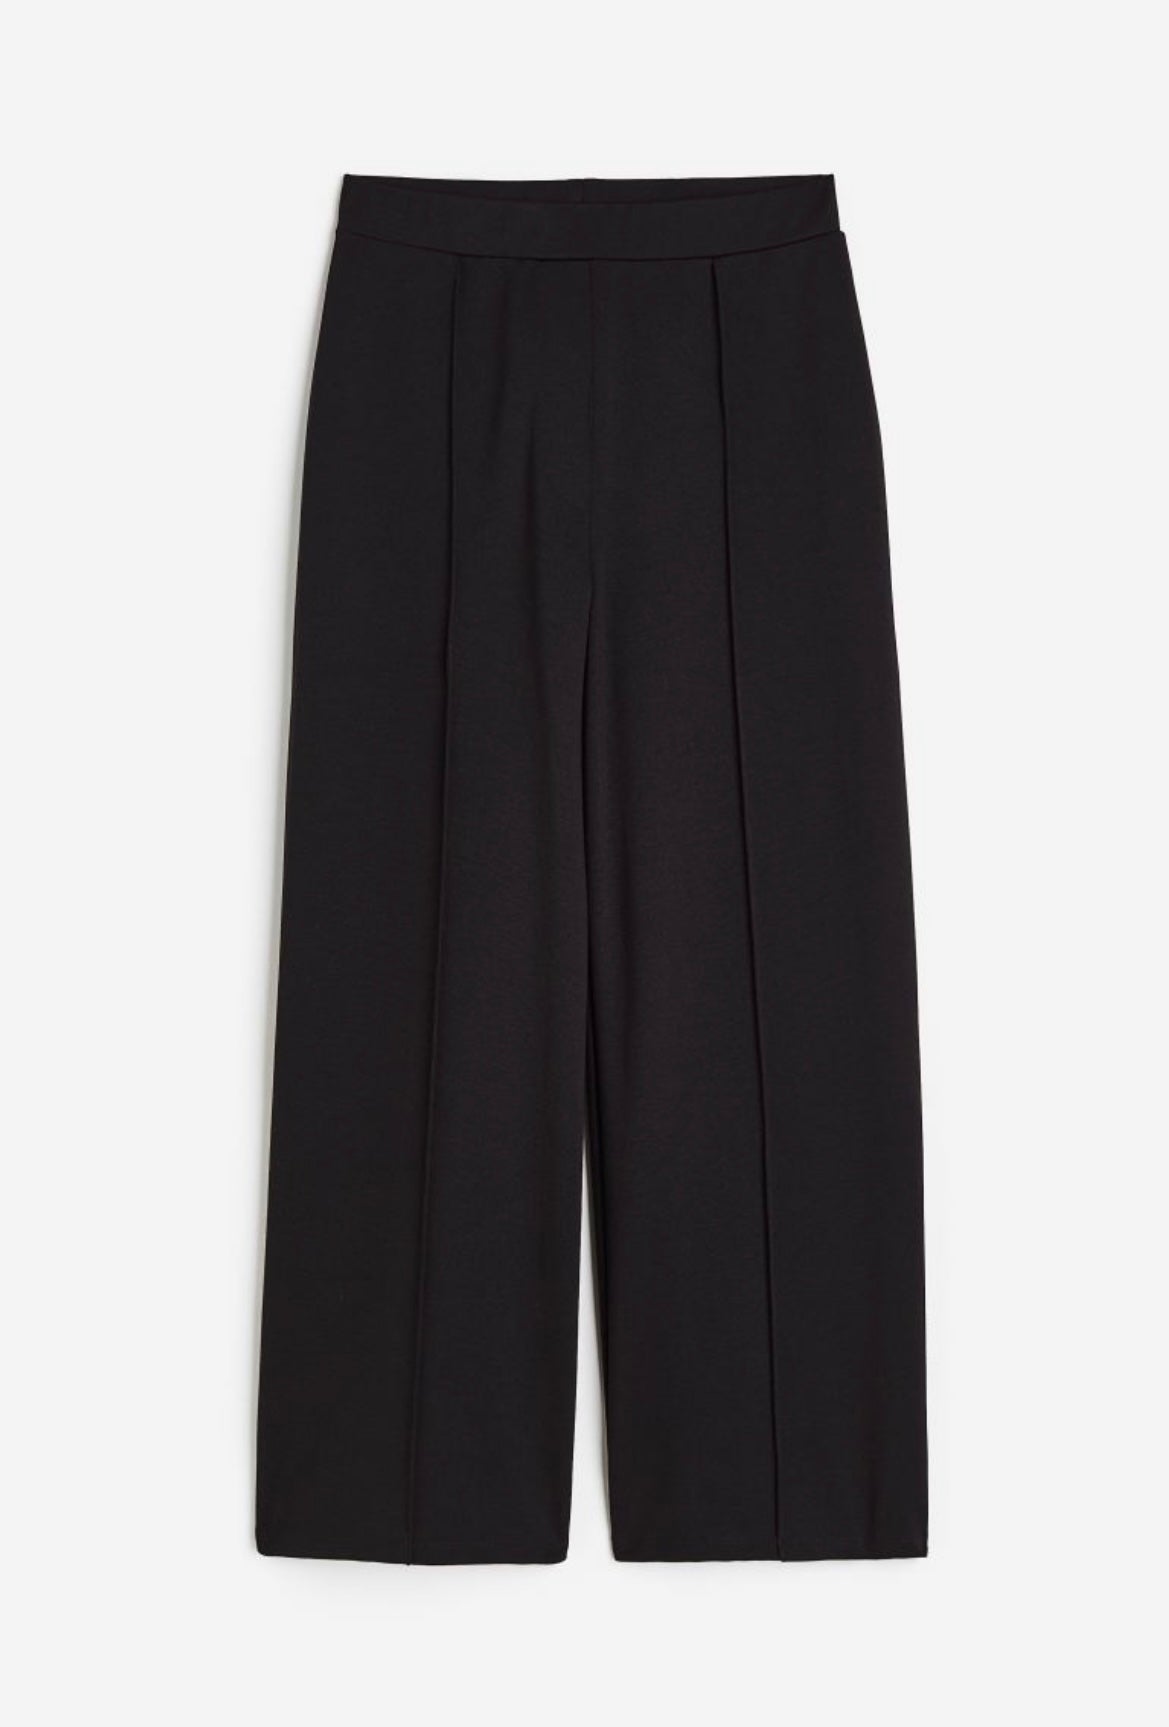 Black Wide Leg Trouser (with Pockets)